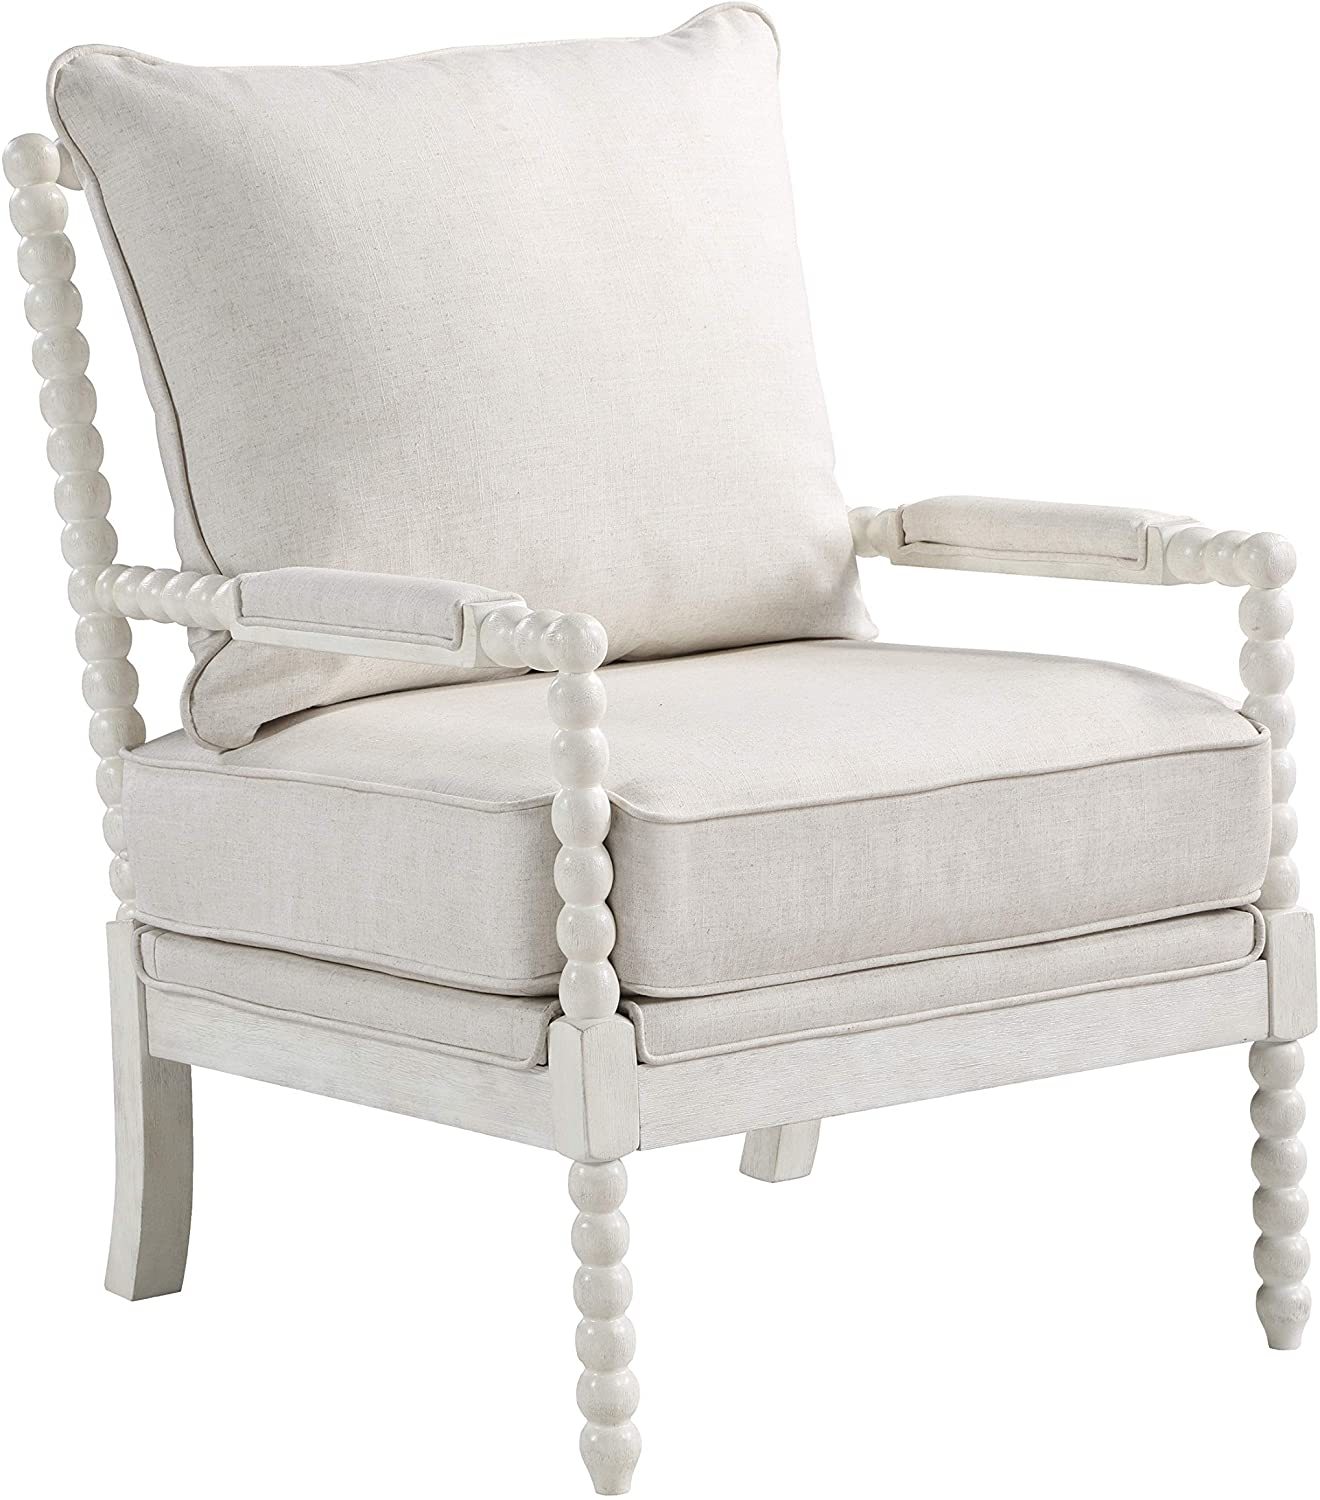 OSP Home Furnishings Kaylee Spindle Accent Chair, 26.5” W x 32.25” D x 37” H, - $422.99